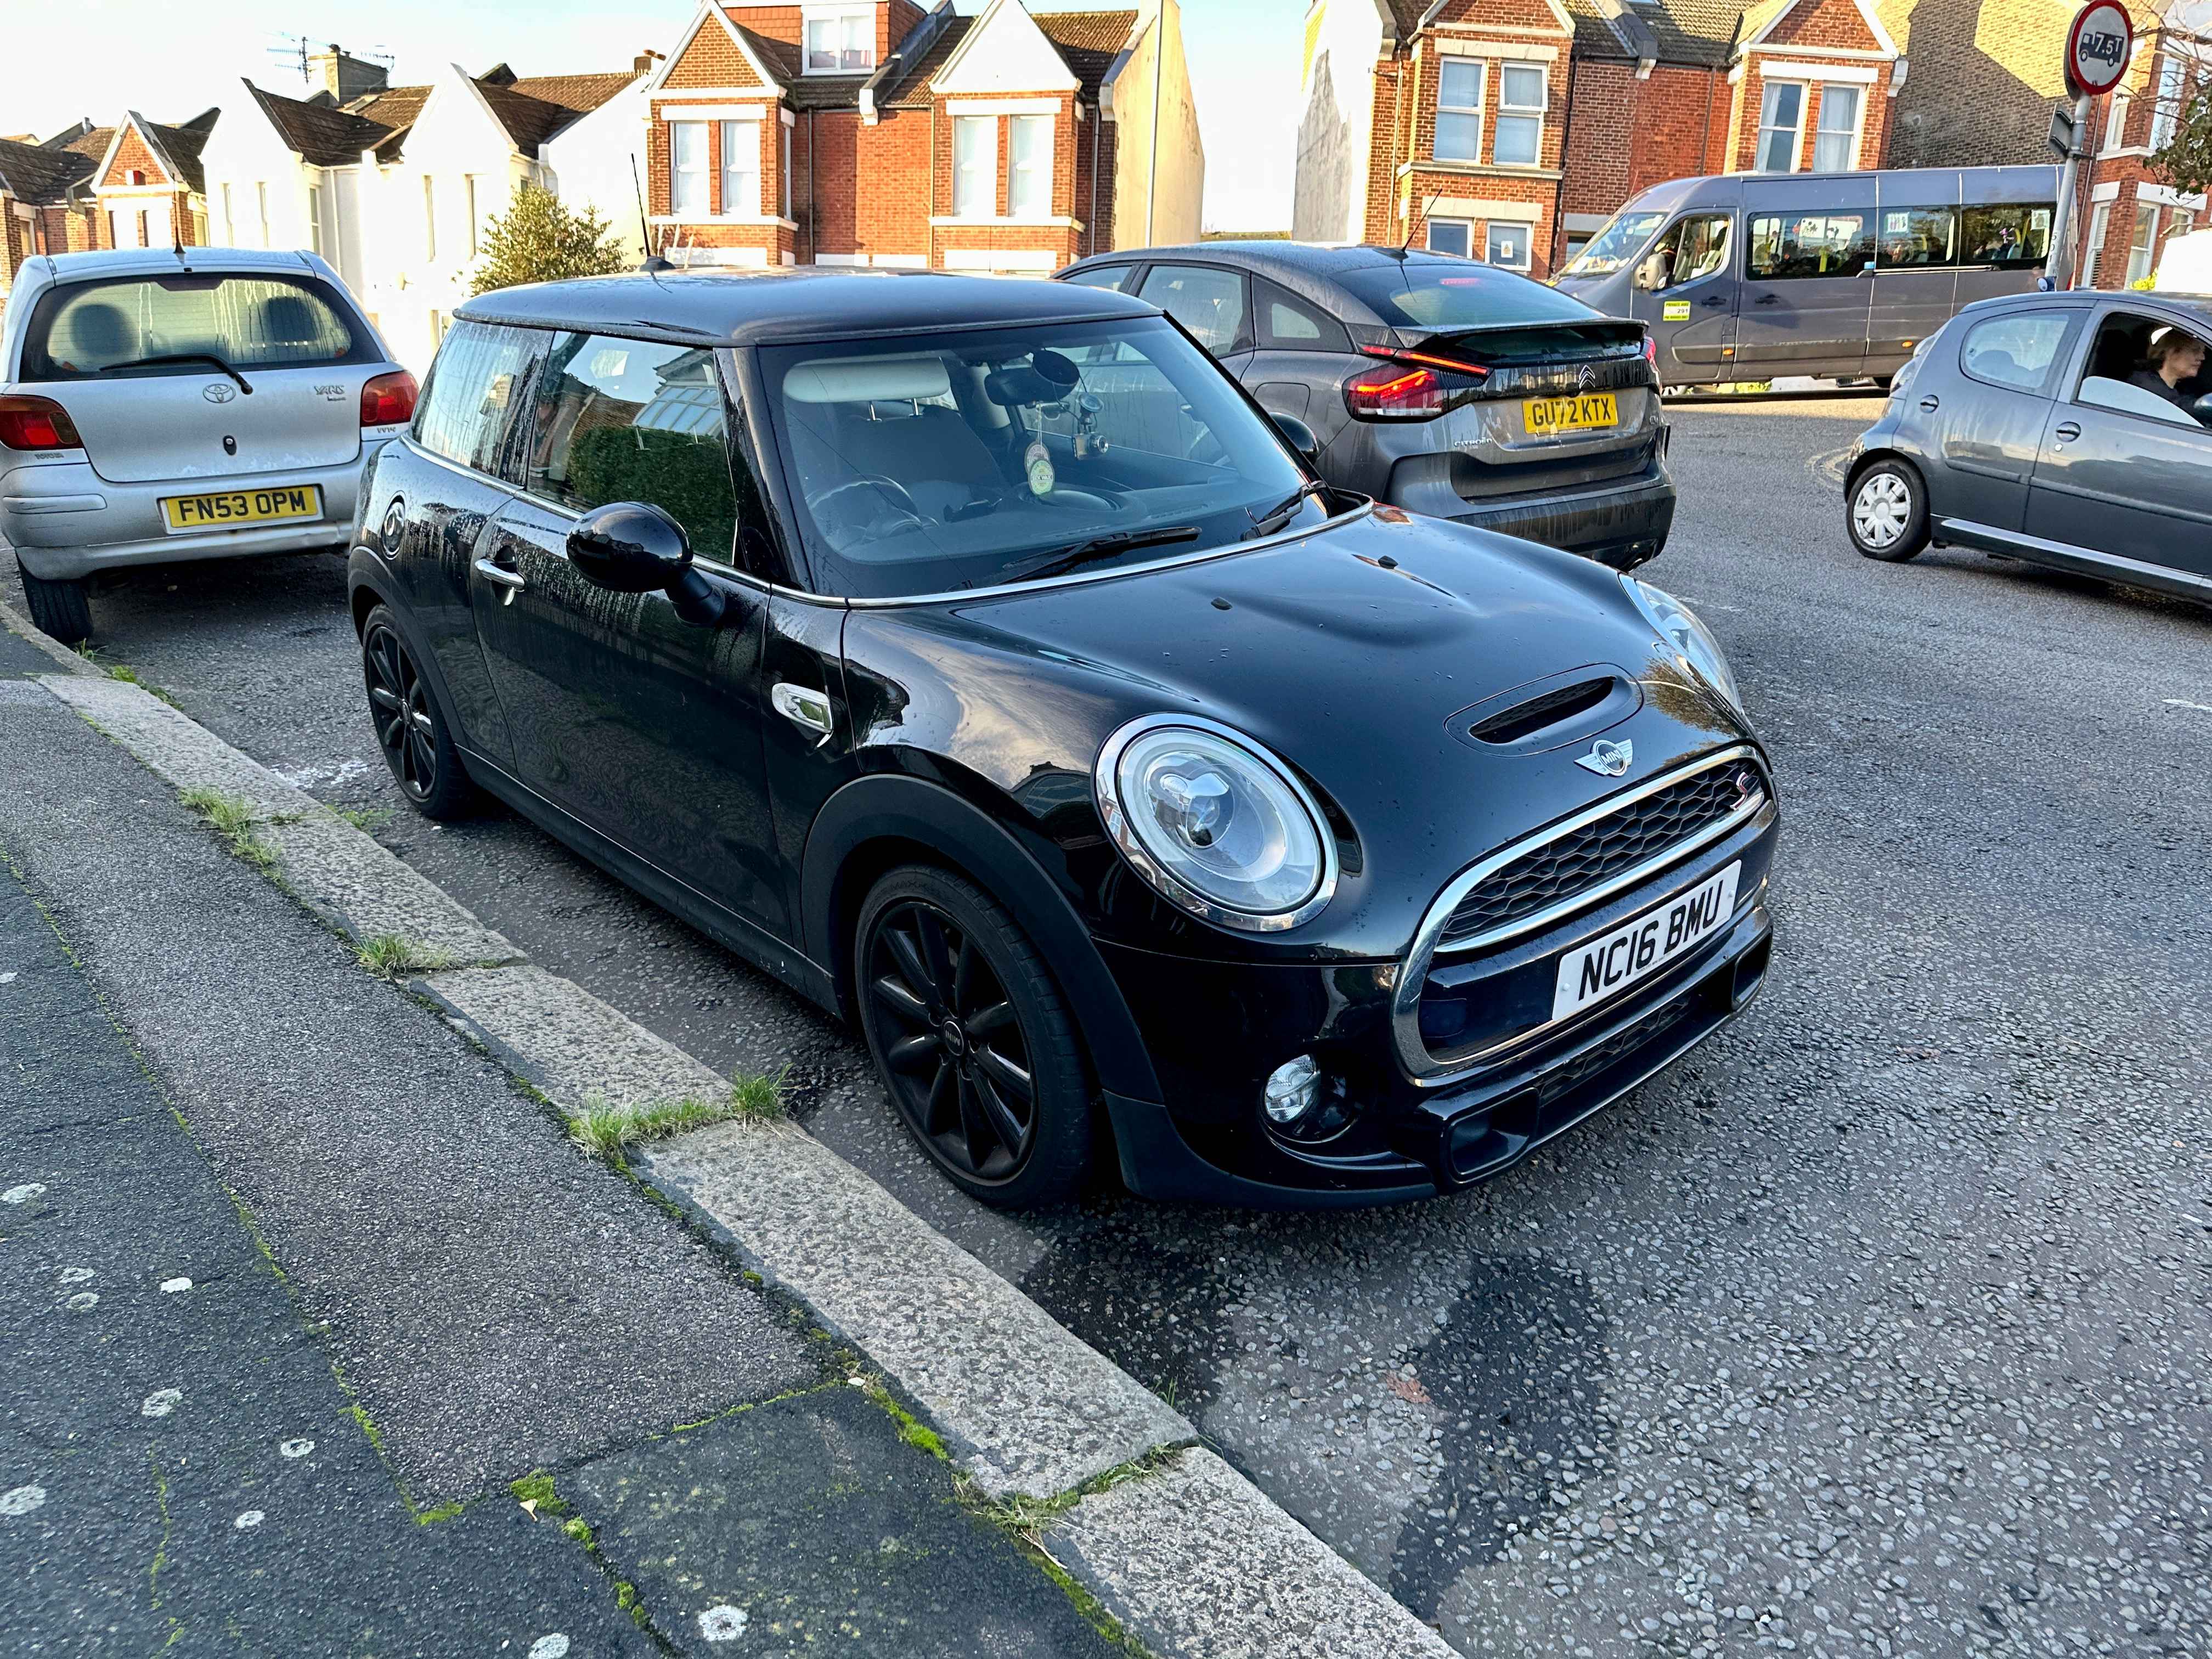 Photograph of NC16 BMU - a Black Mini Cooper parked in Hollingdean by a non-resident who uses the local area as part of their Brighton commute. The second of four photographs supplied by the residents of Hollingdean.